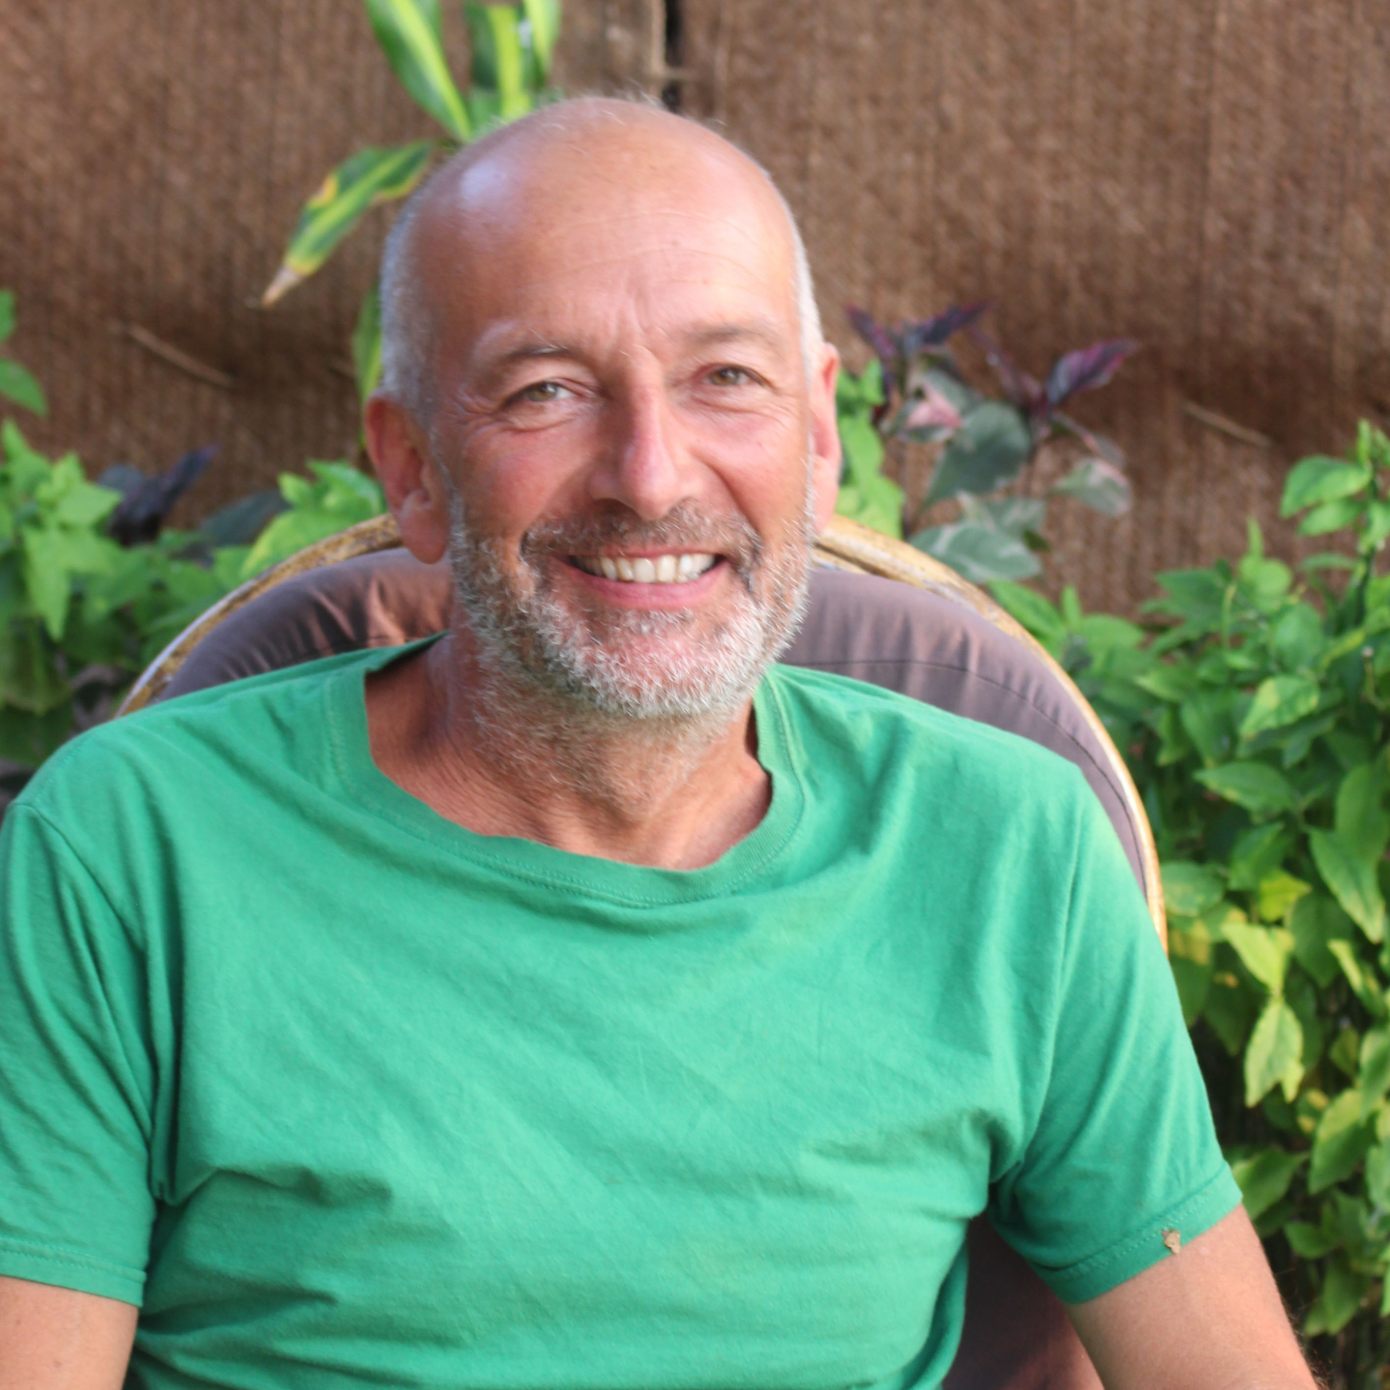 portrait of George Barber, a middle aged white man with a bald head and grey beard wearing a green t-shirt, smiling and sitting in front of some plants